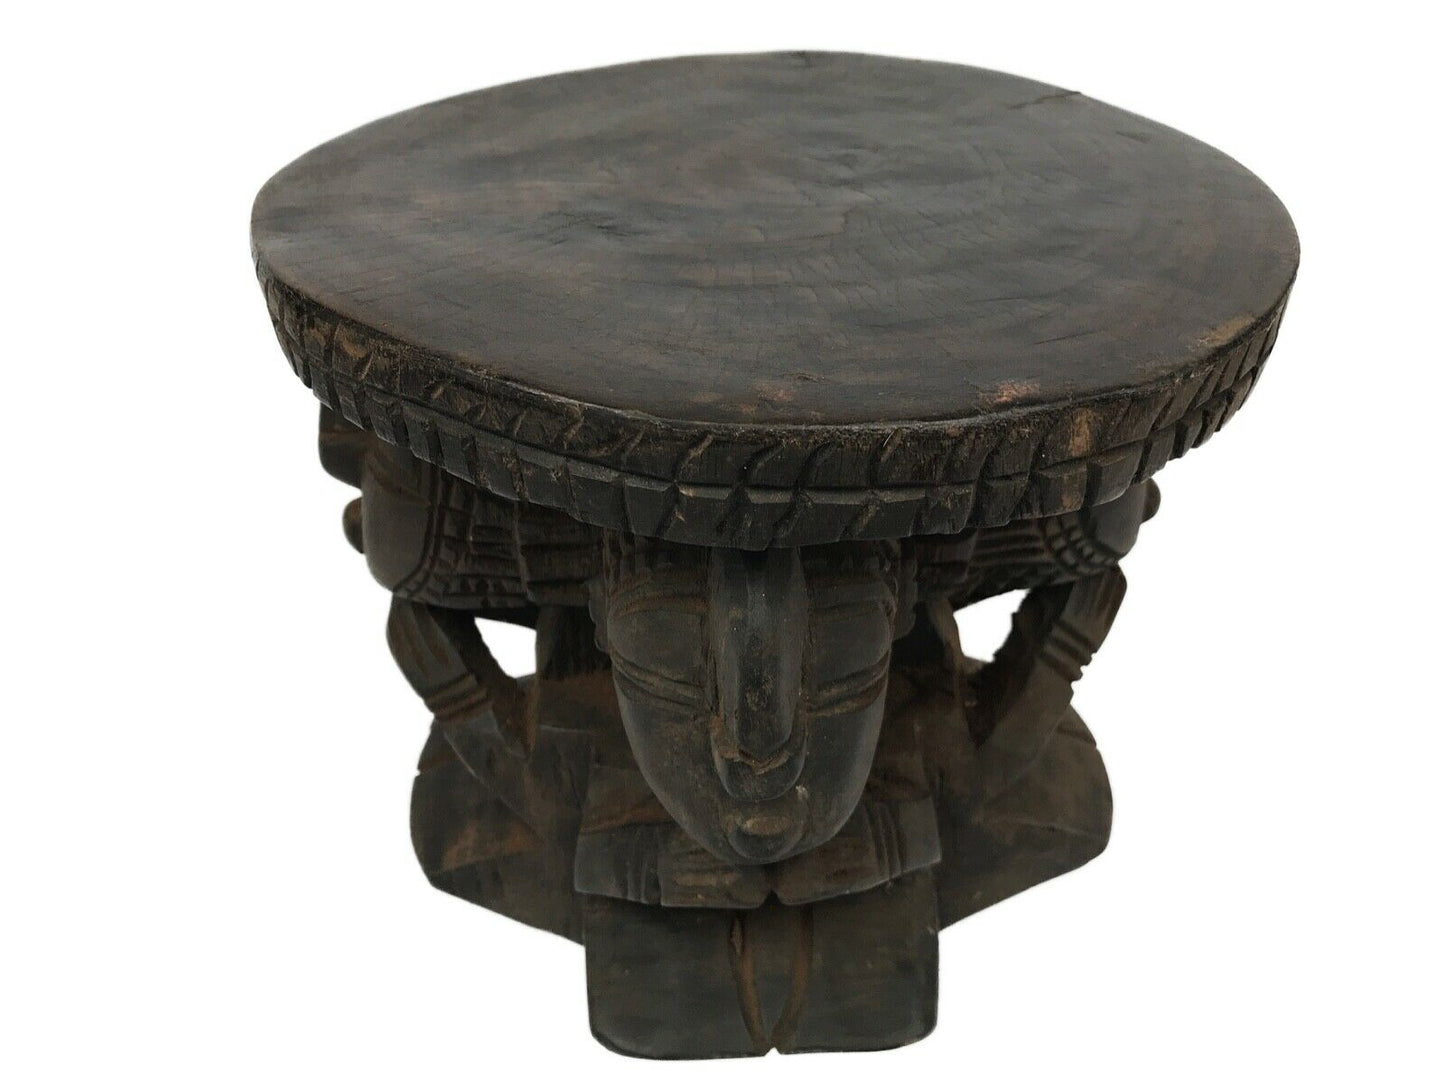 #150 Superb African Carved wood  Baga  Stool/Table  Guinea 8.25" H by 8.75" D